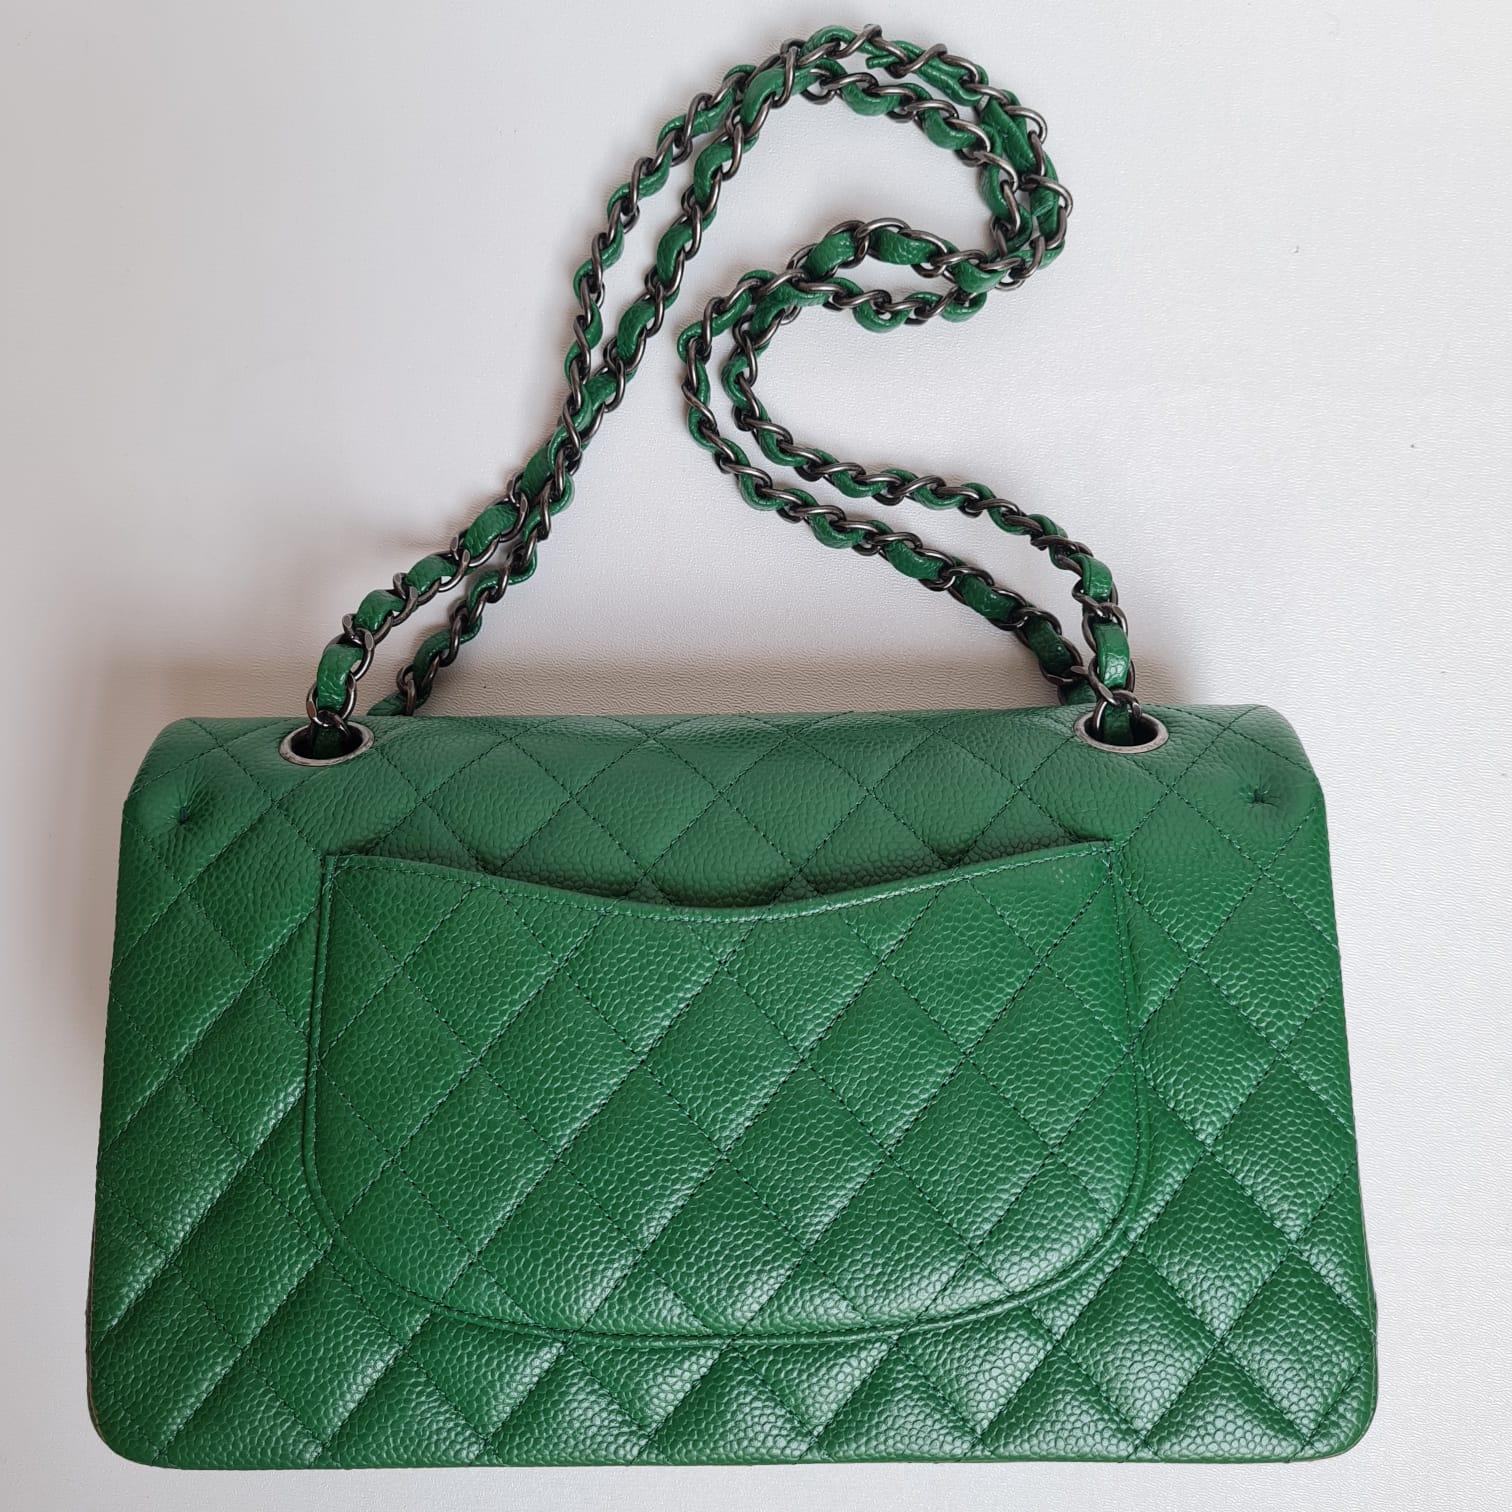 Rare Chanel Emerald Green Caviar Quilted Classic Medium Double Flap Bag RHW 2